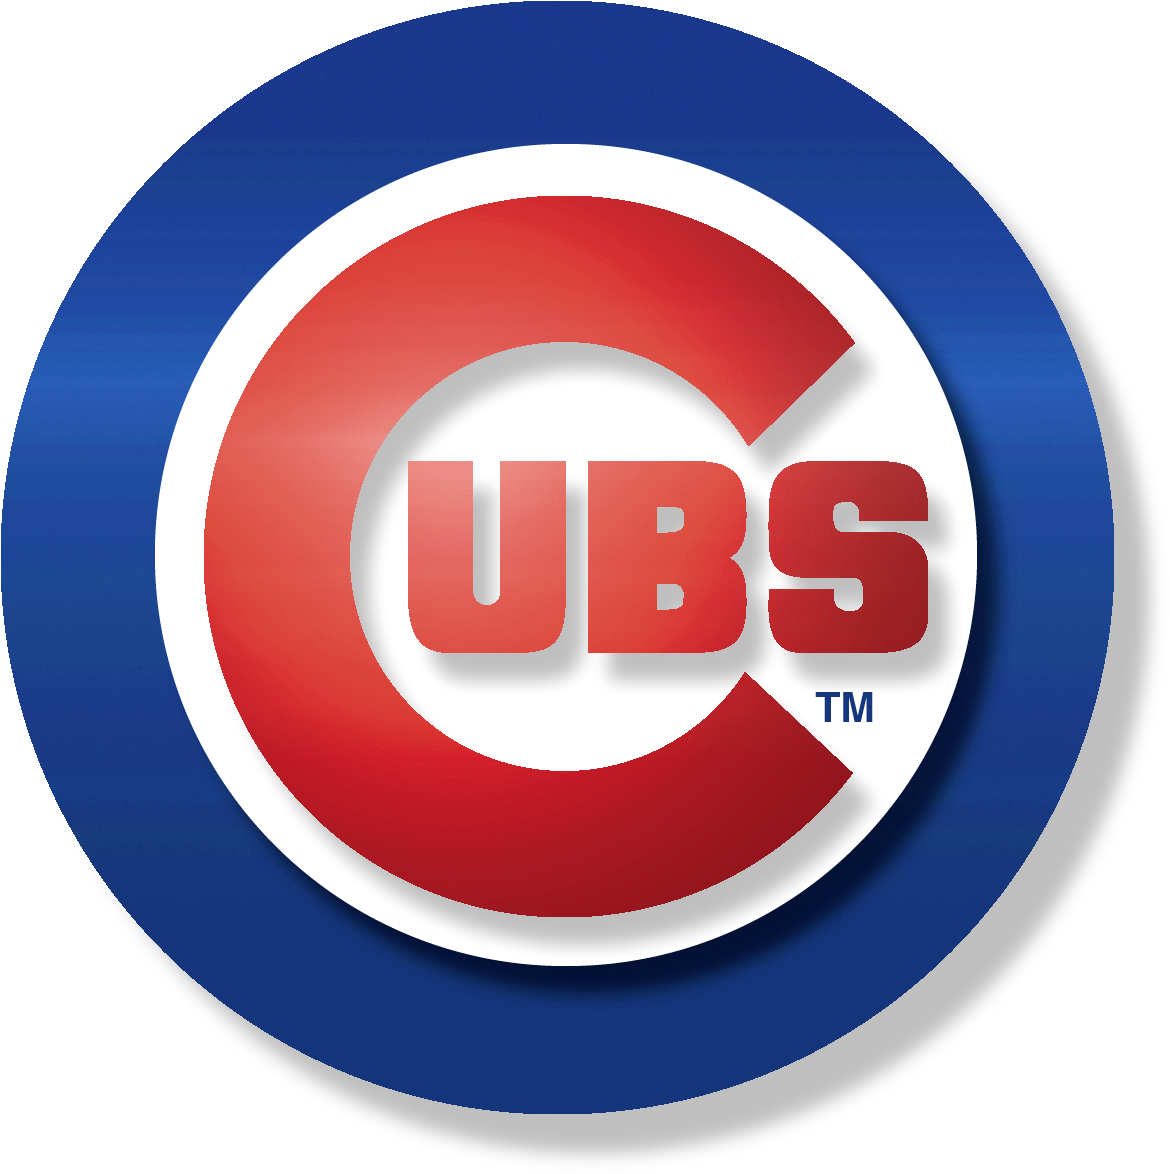 Chicago Cubs Logo Png Clipart - Large Size Png Image - PikPng